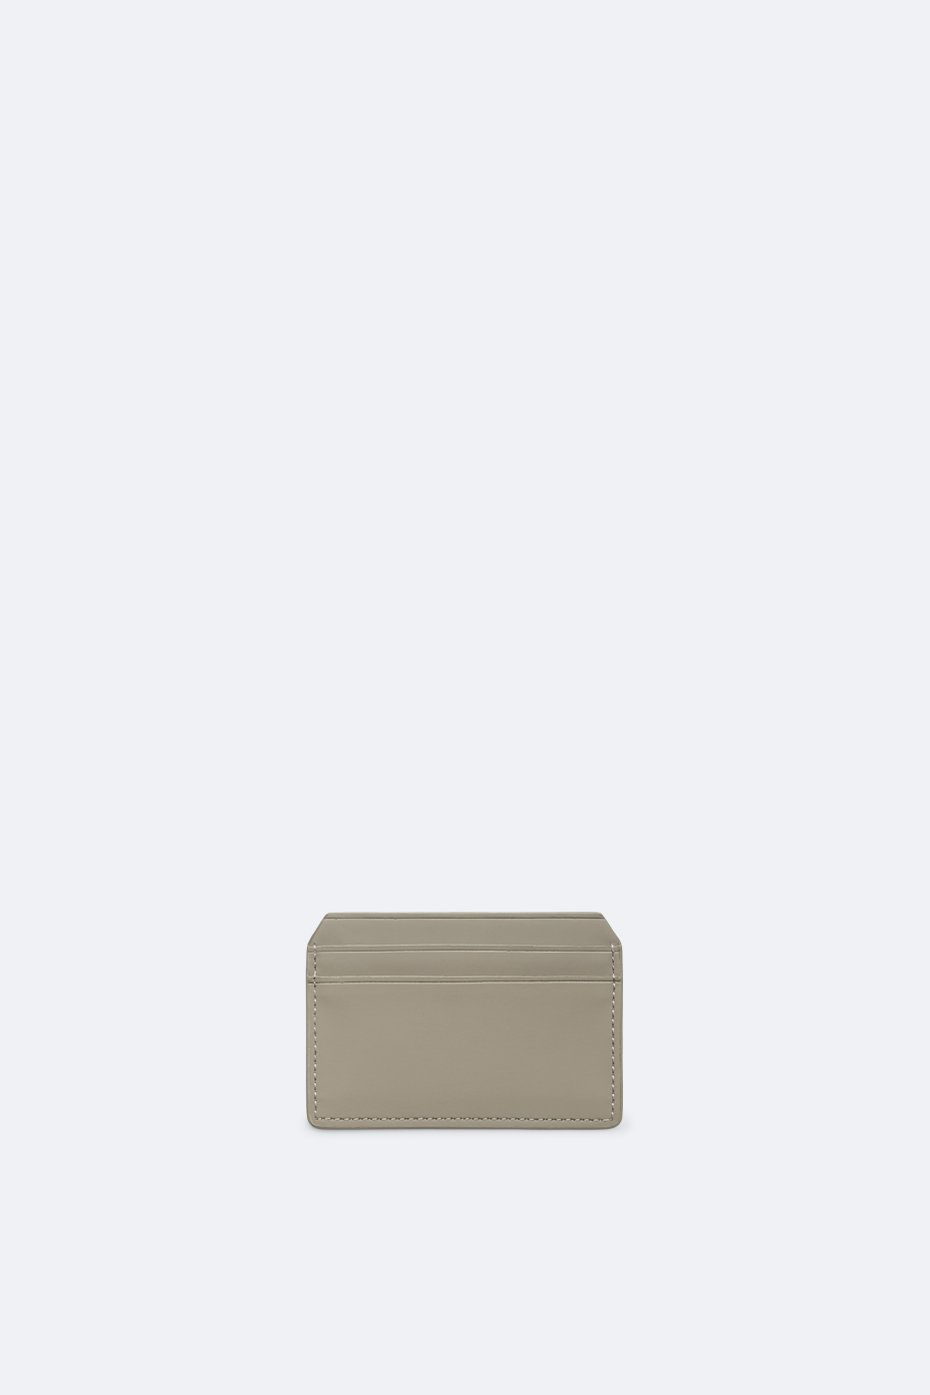 CARD HOLDER - TAUPE